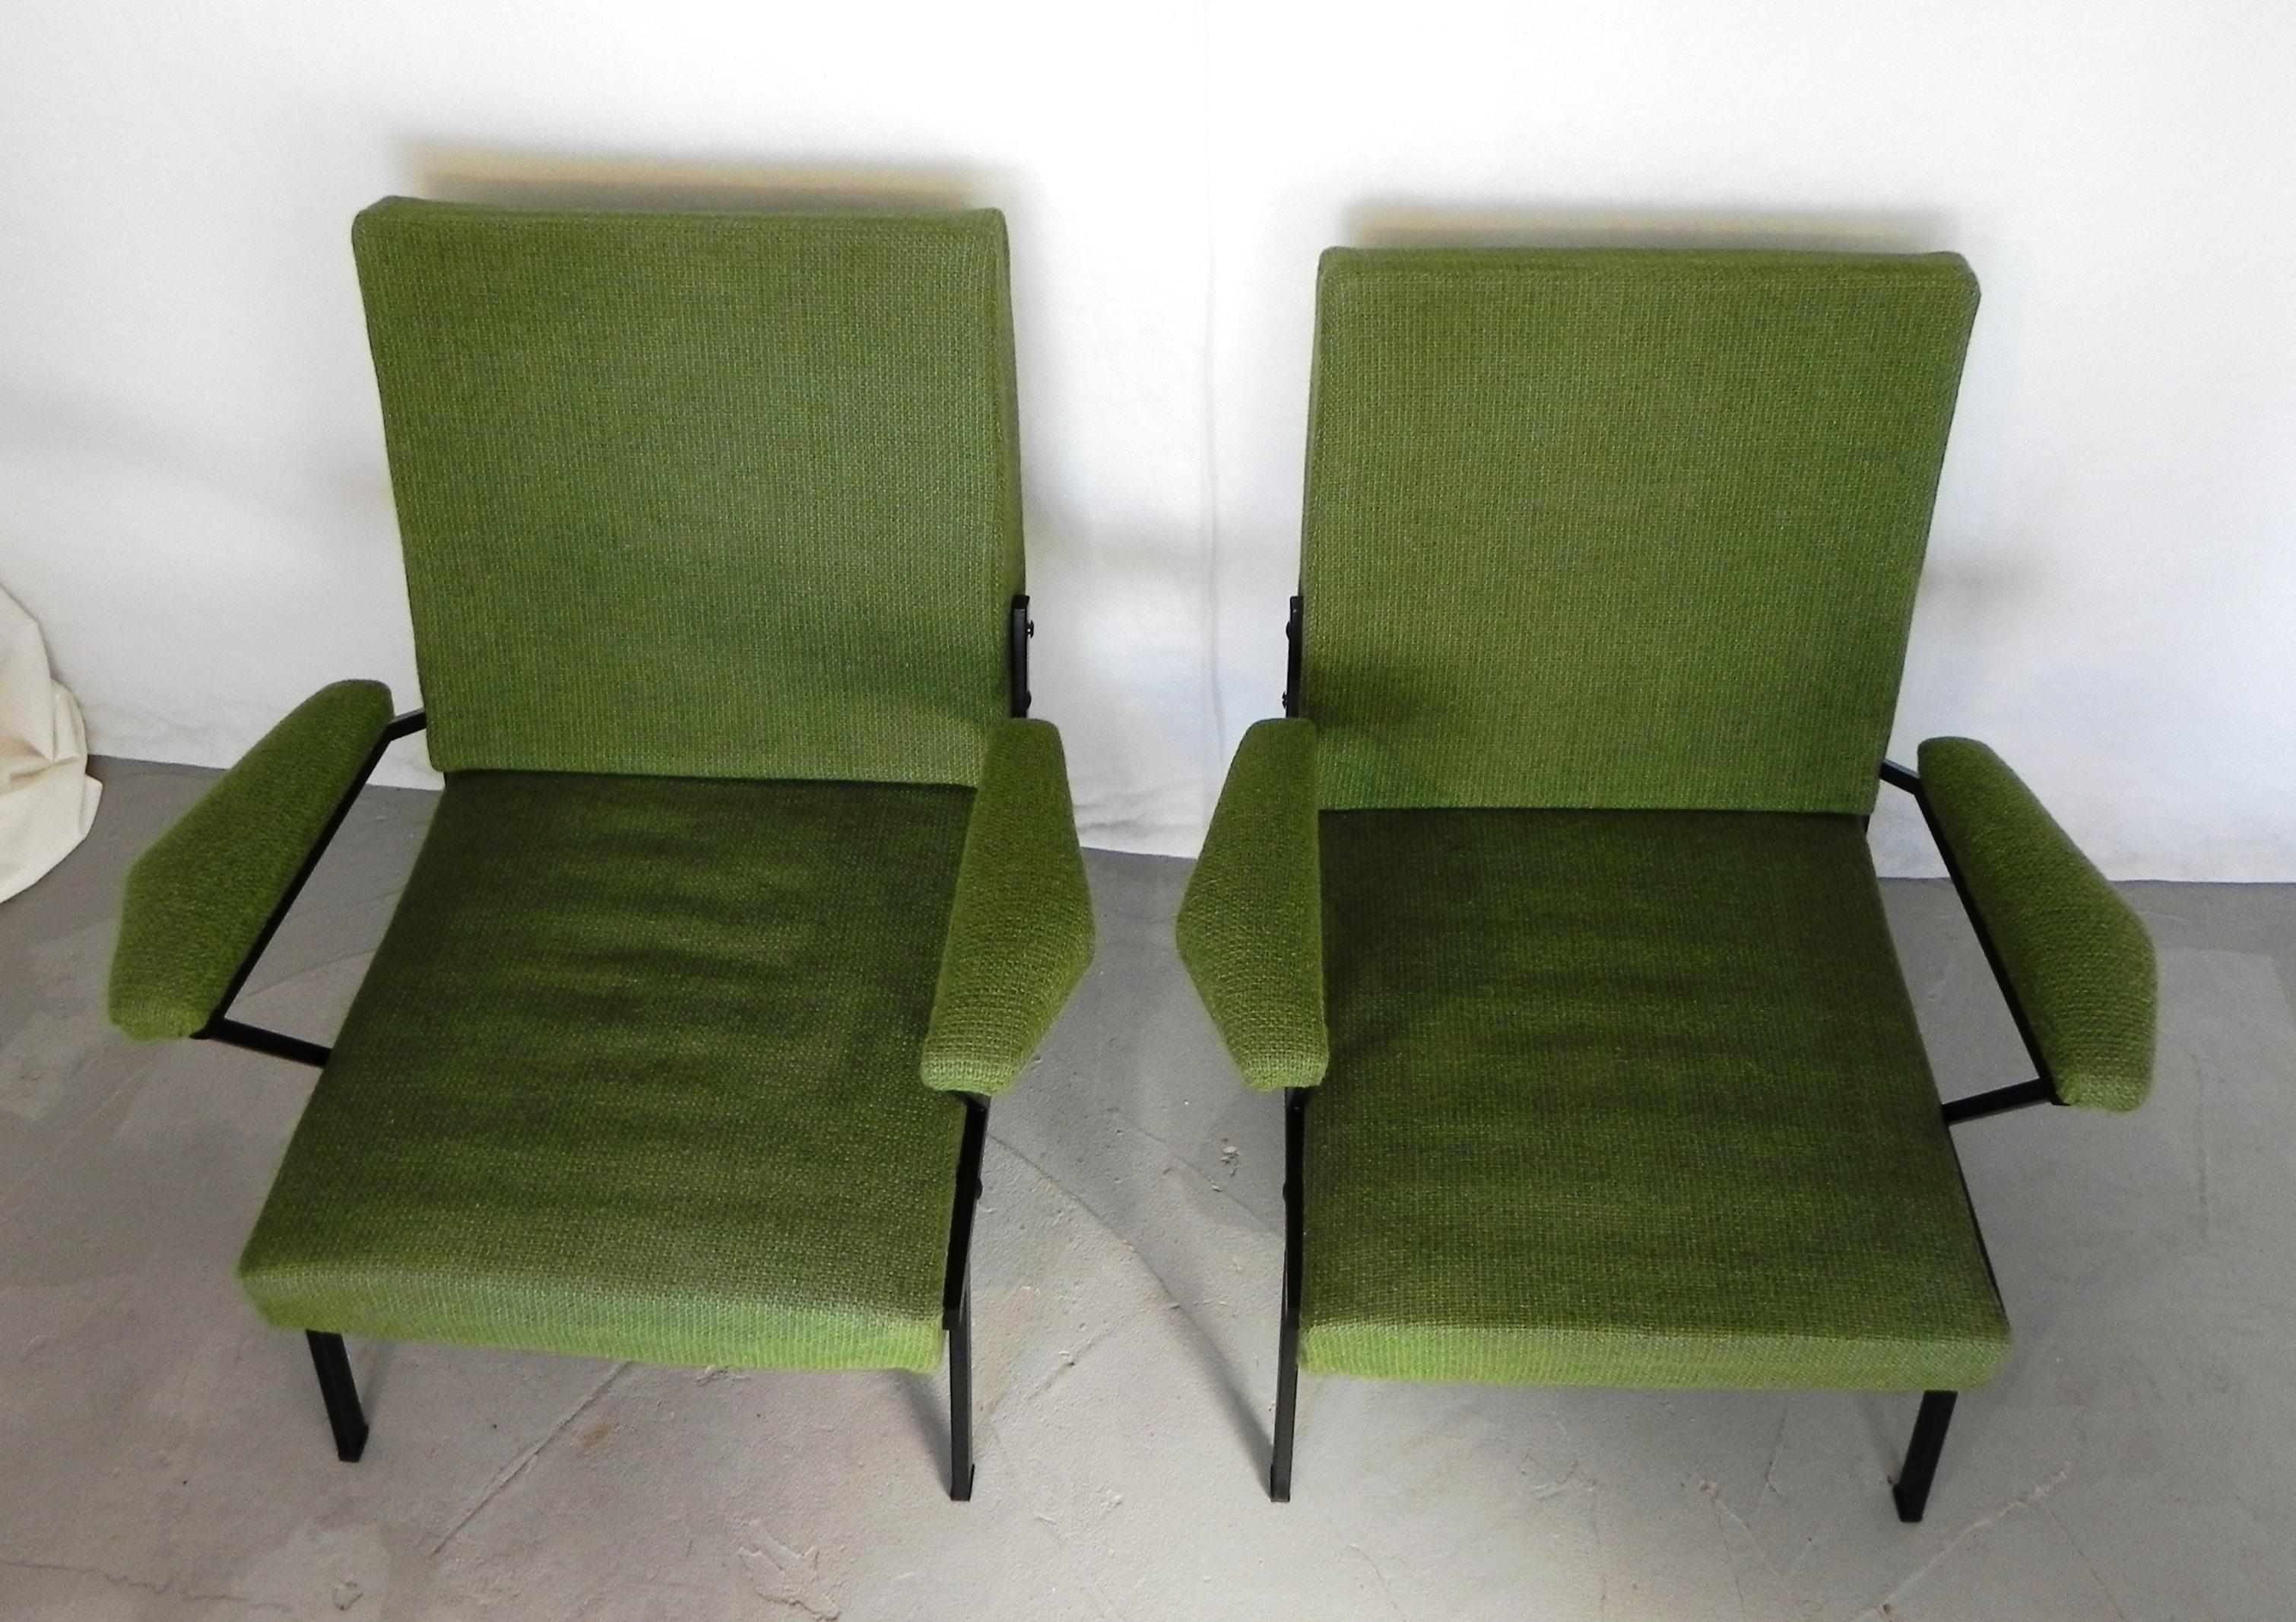 Hand-Crafted 2 armchairs from the 1960s